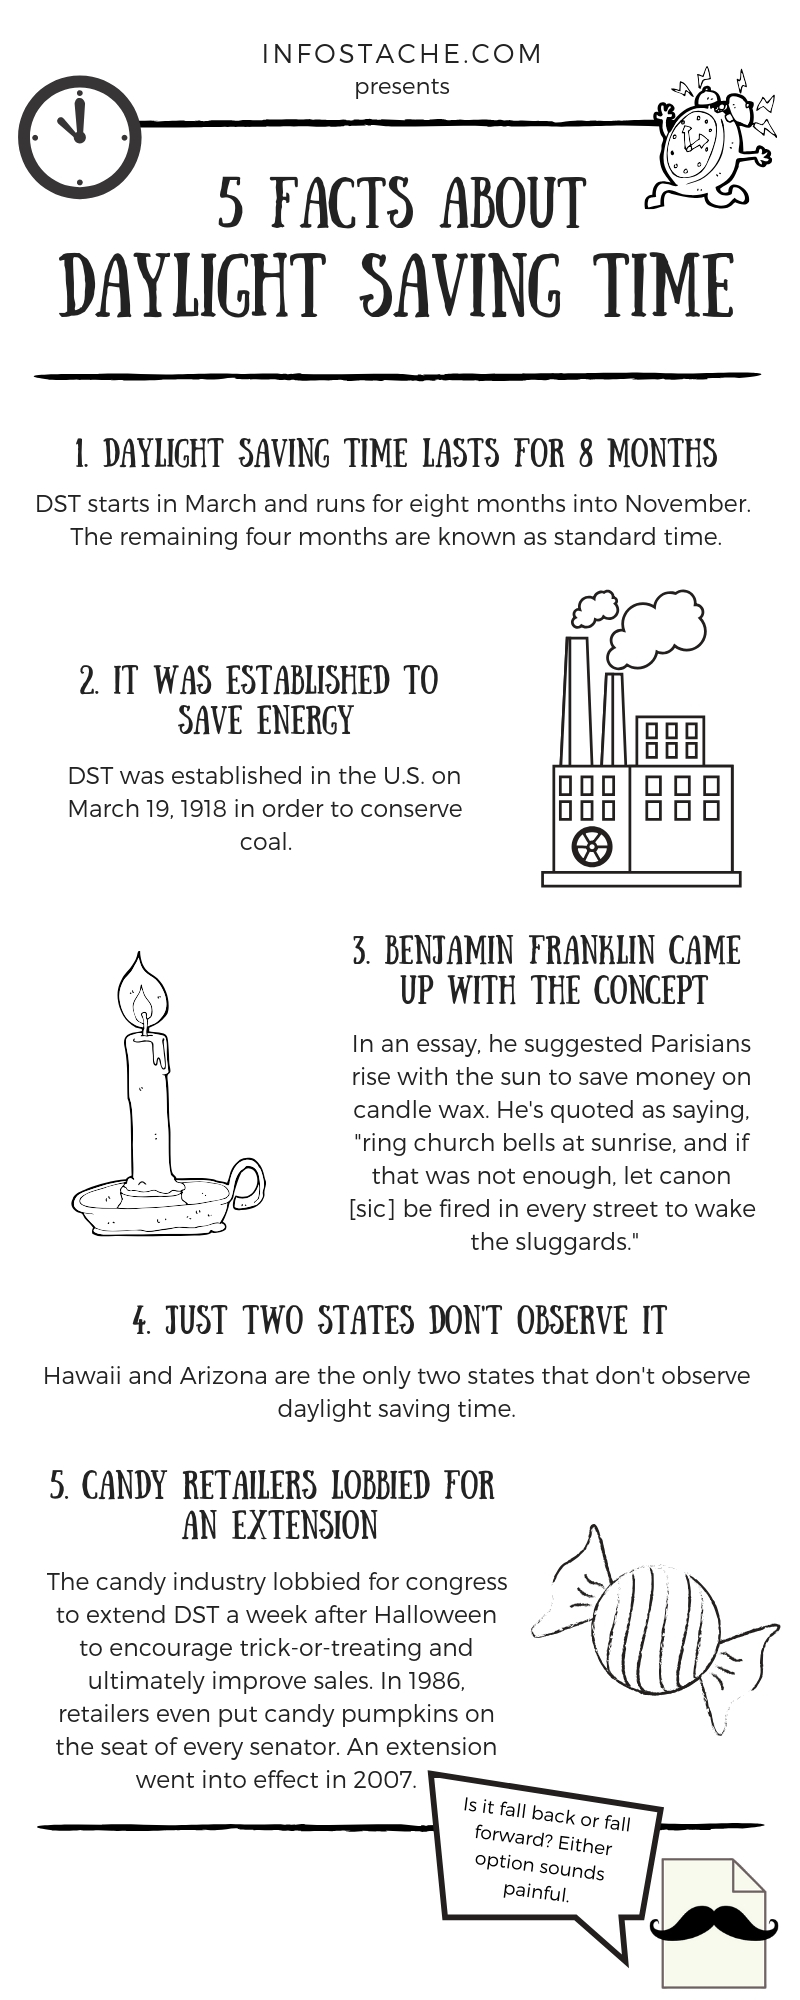 5 Facts About Daylight Saving Time - Infographic